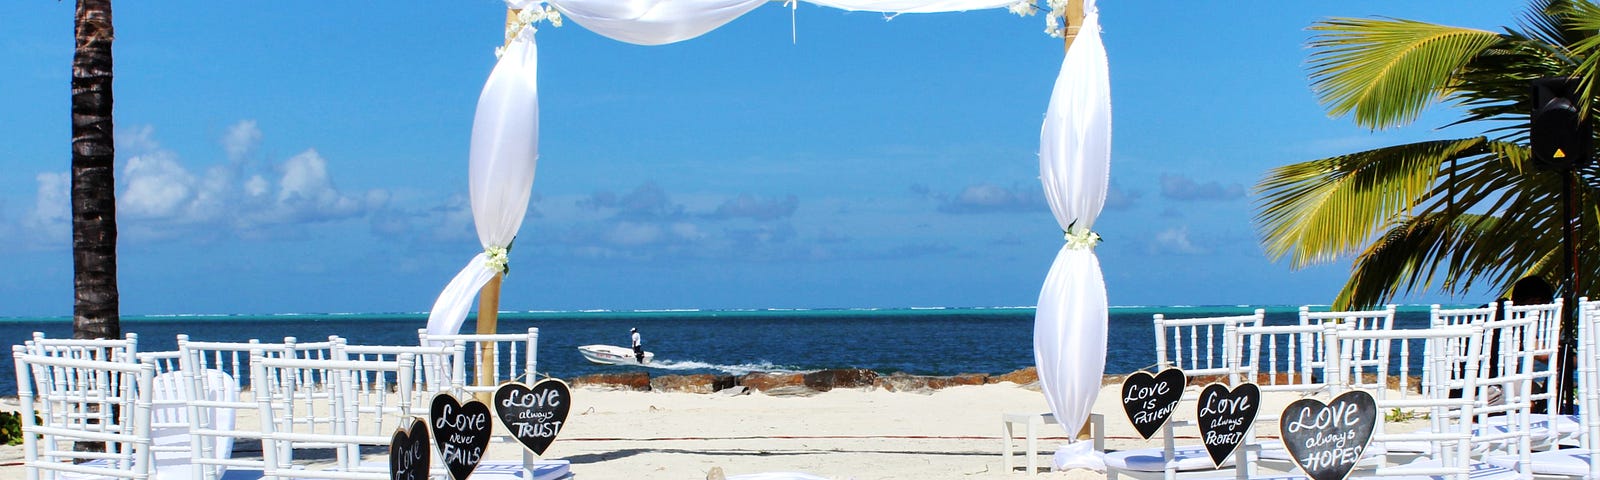 simple wedding canopy and chairs set on the beach ready for the ceremony.